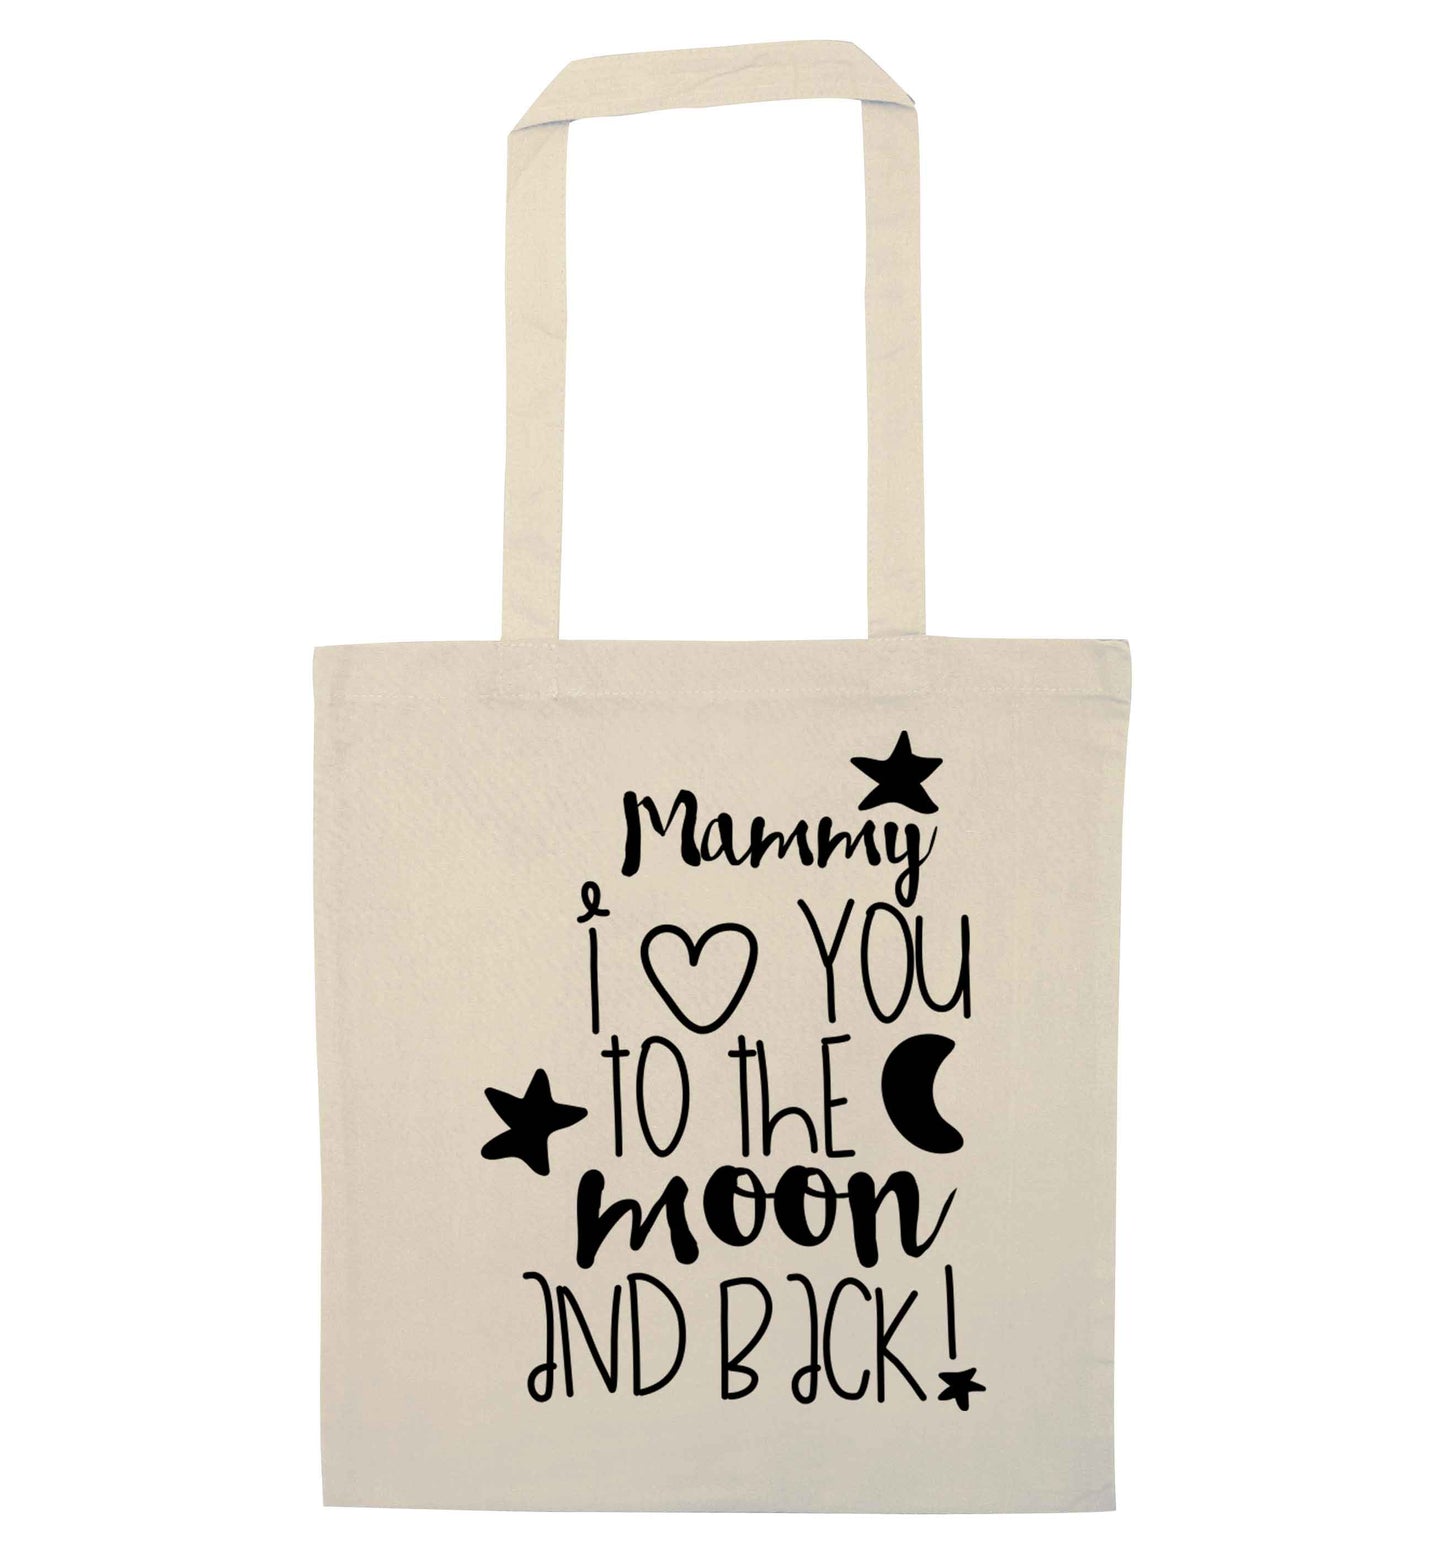 Mammy I love you to the moon and back natural tote bag